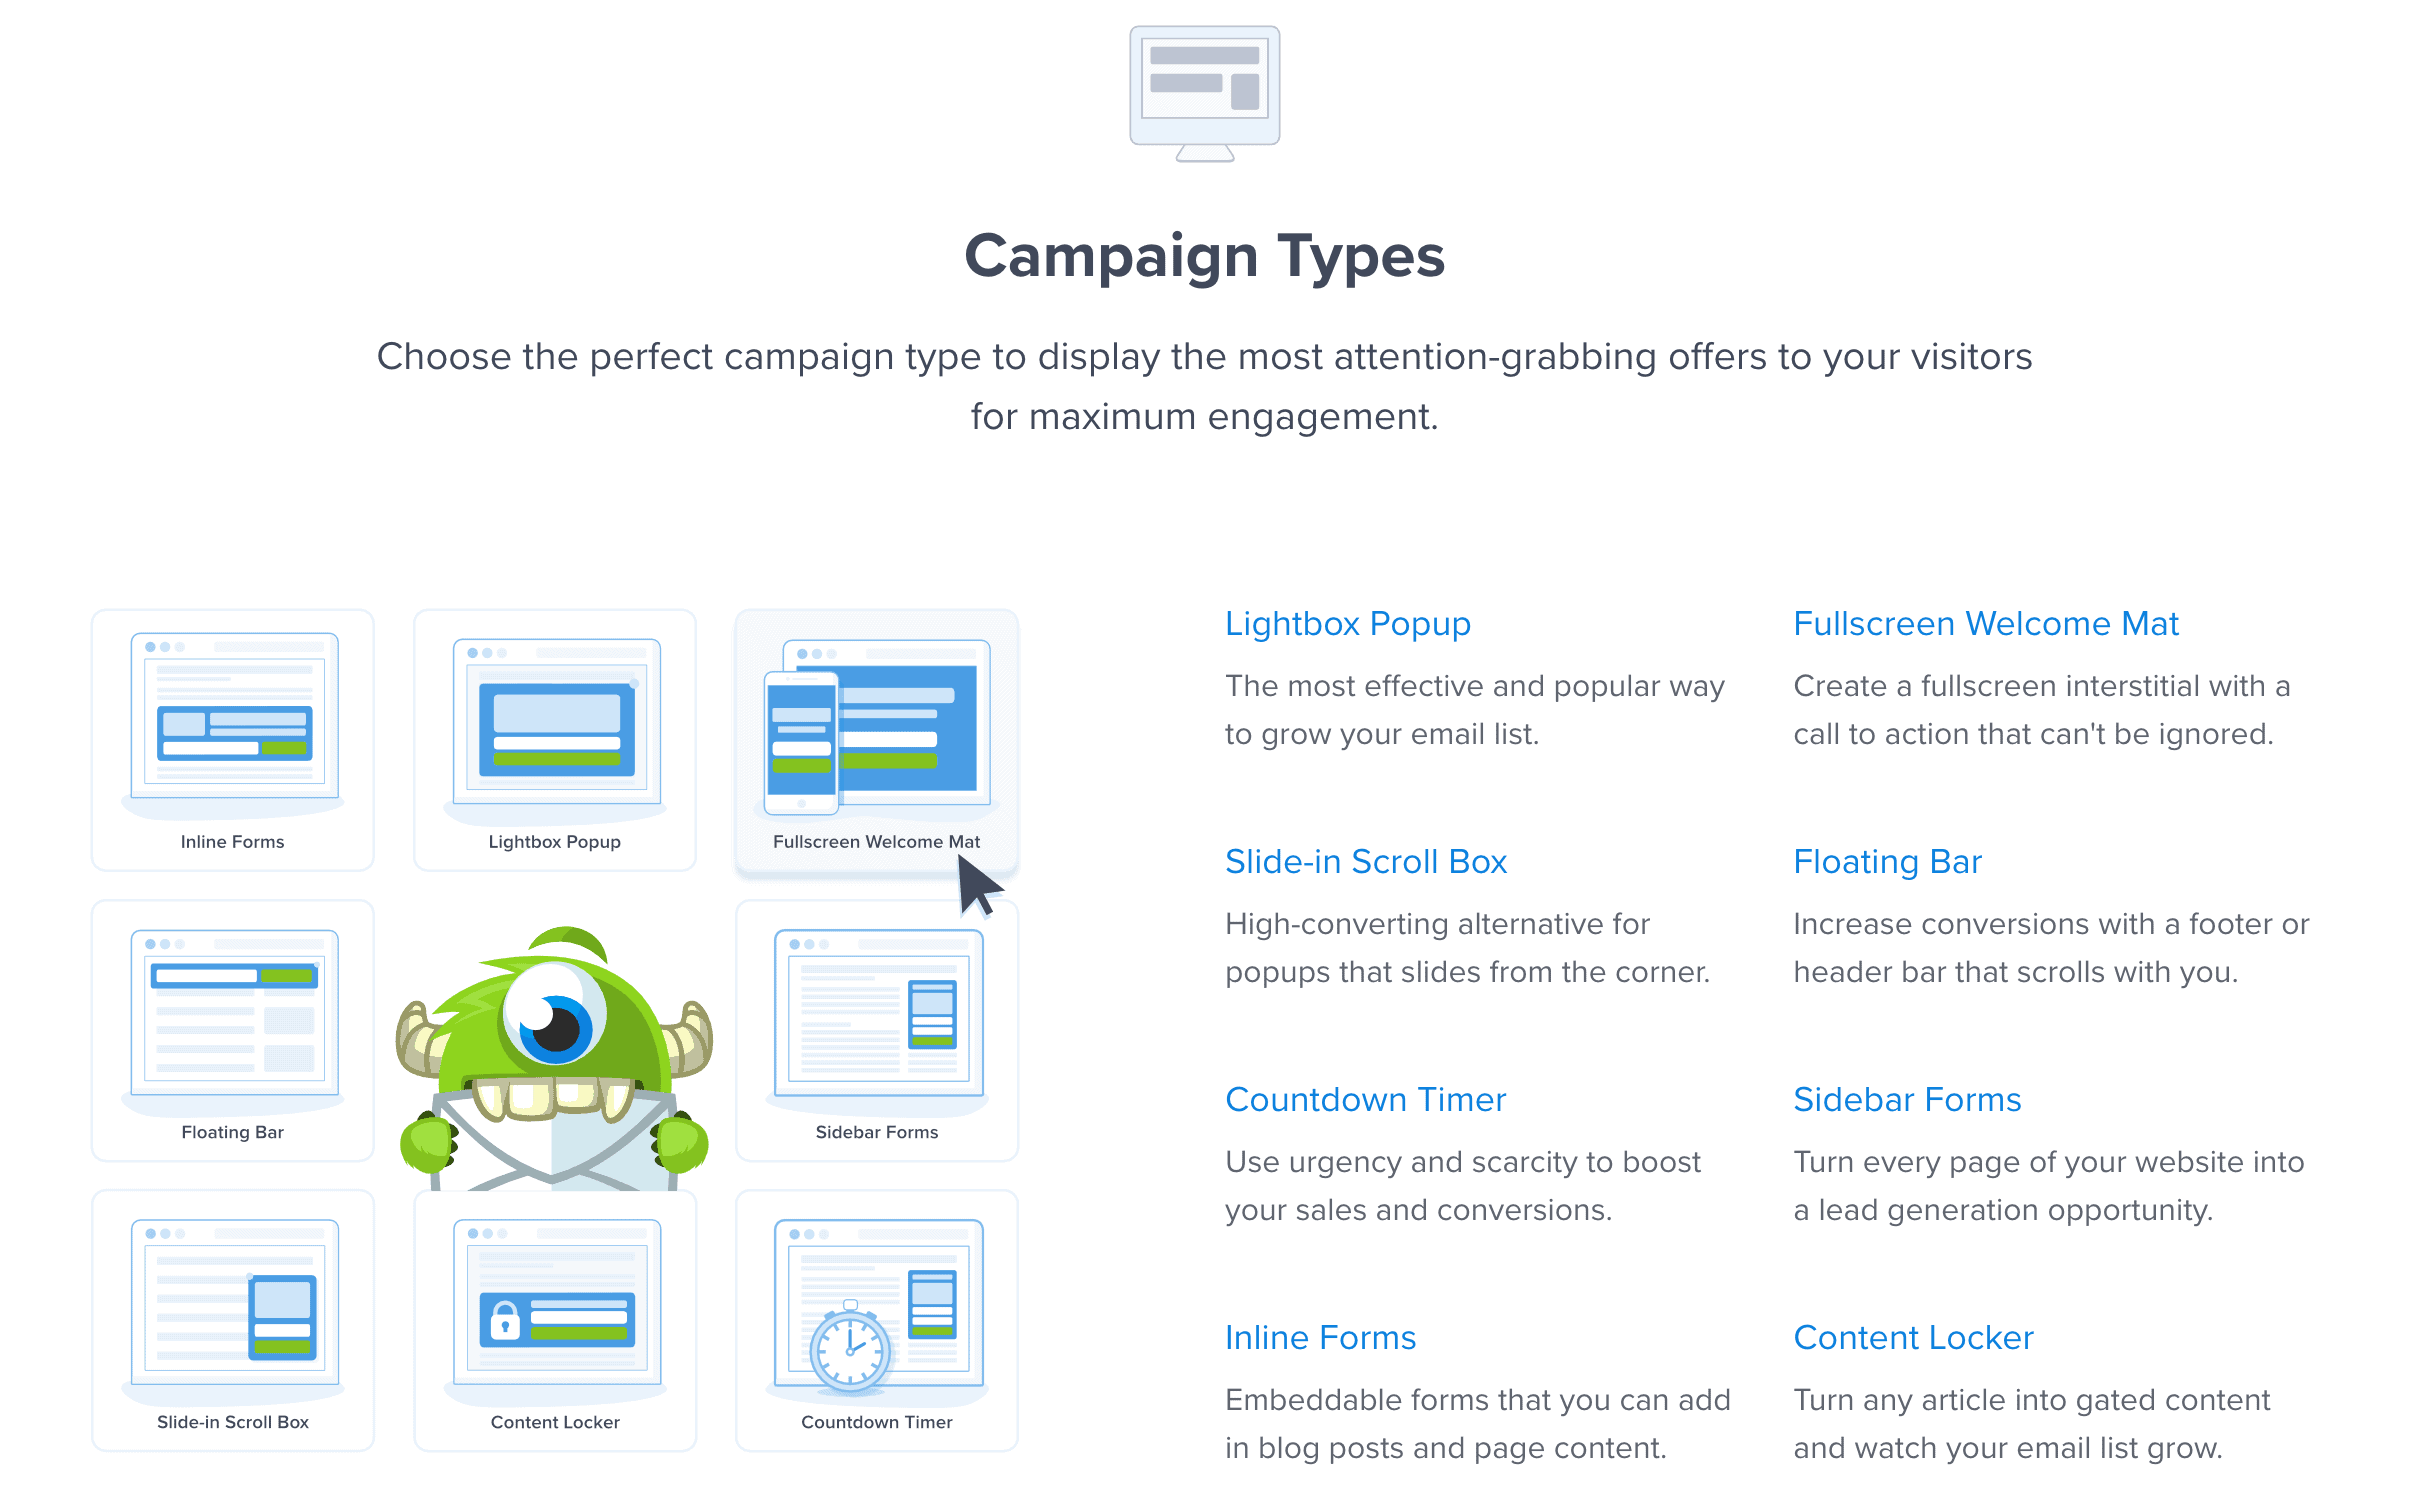 OptinMonster Campaign Types